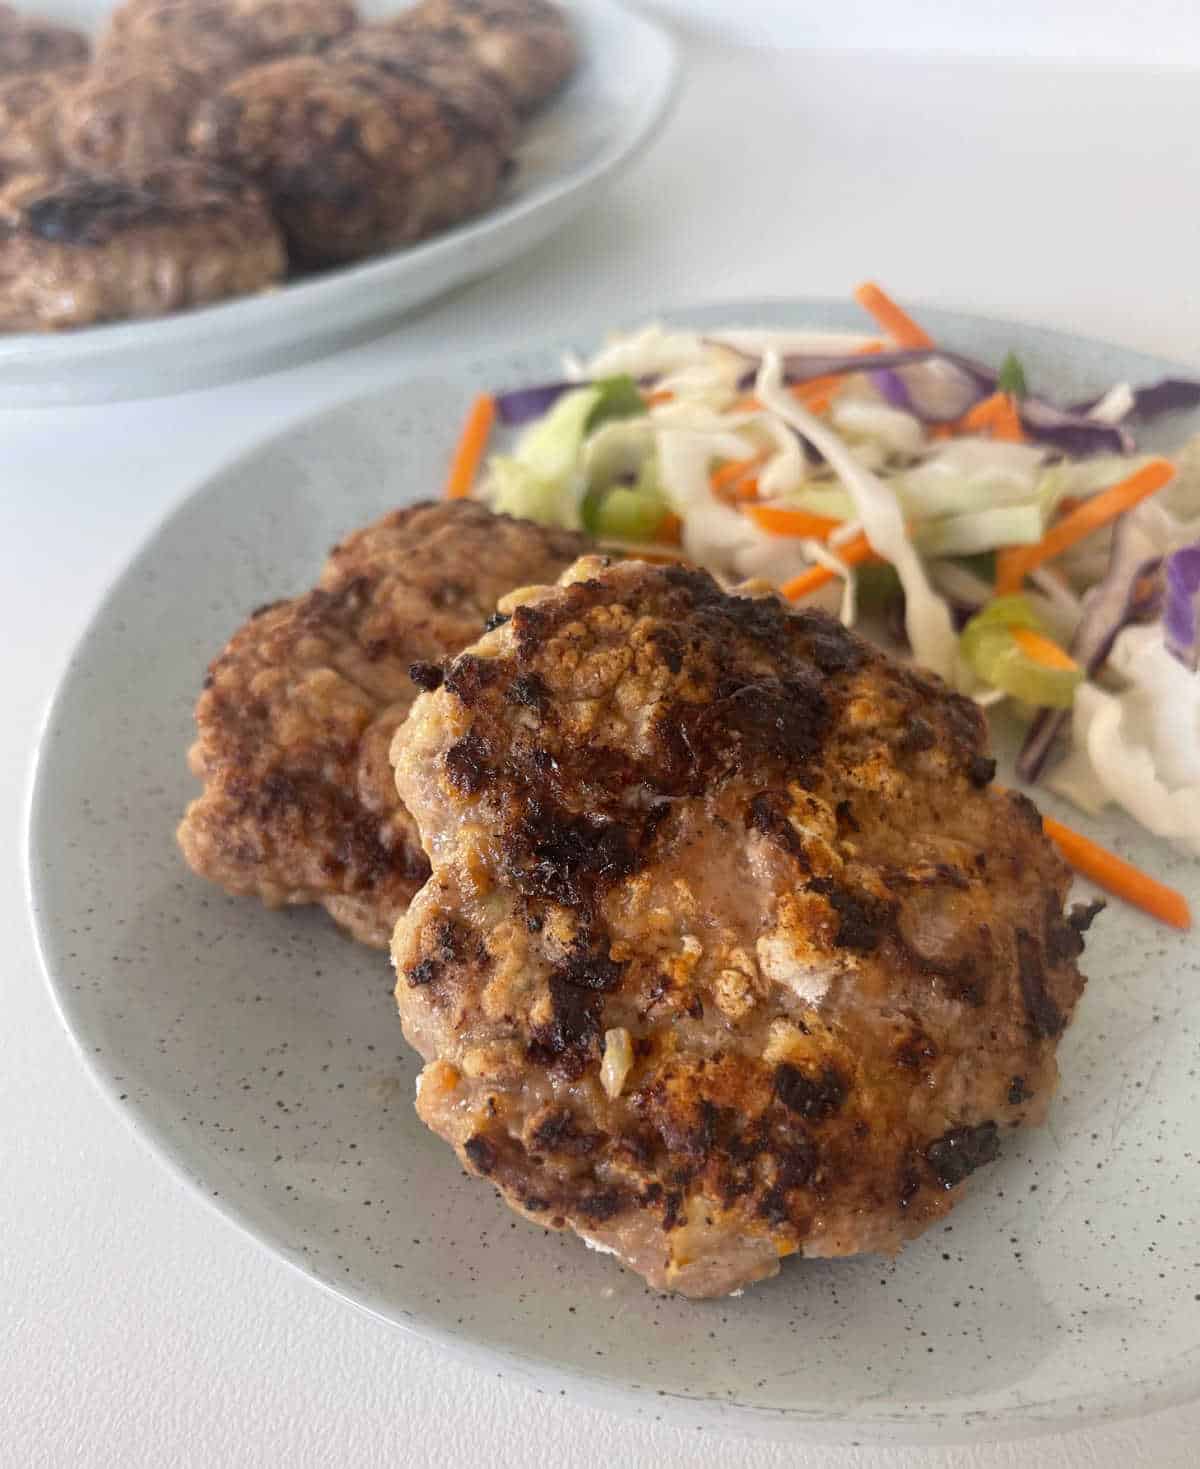 Two rissoles sitting on a green speckled plate with salad on the side.